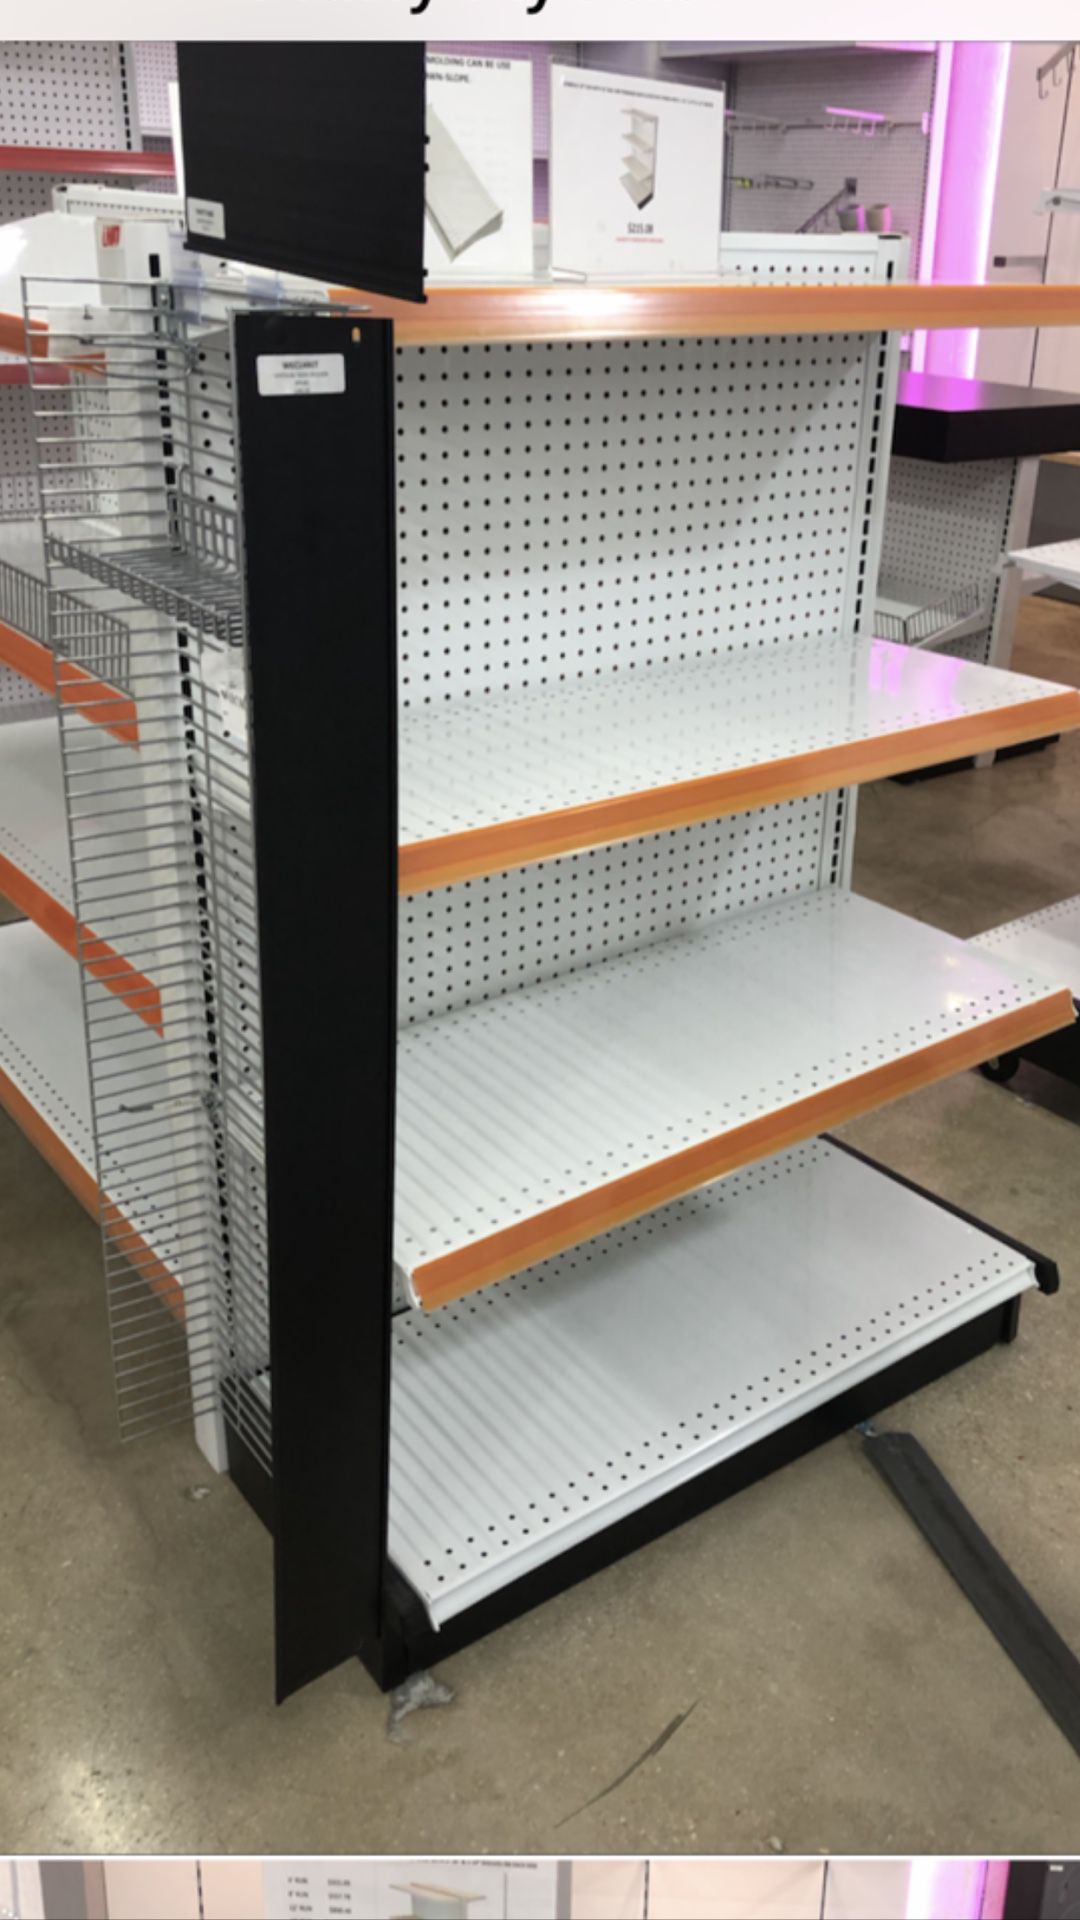 2x White end cap metal shelves with all accessories each 175$